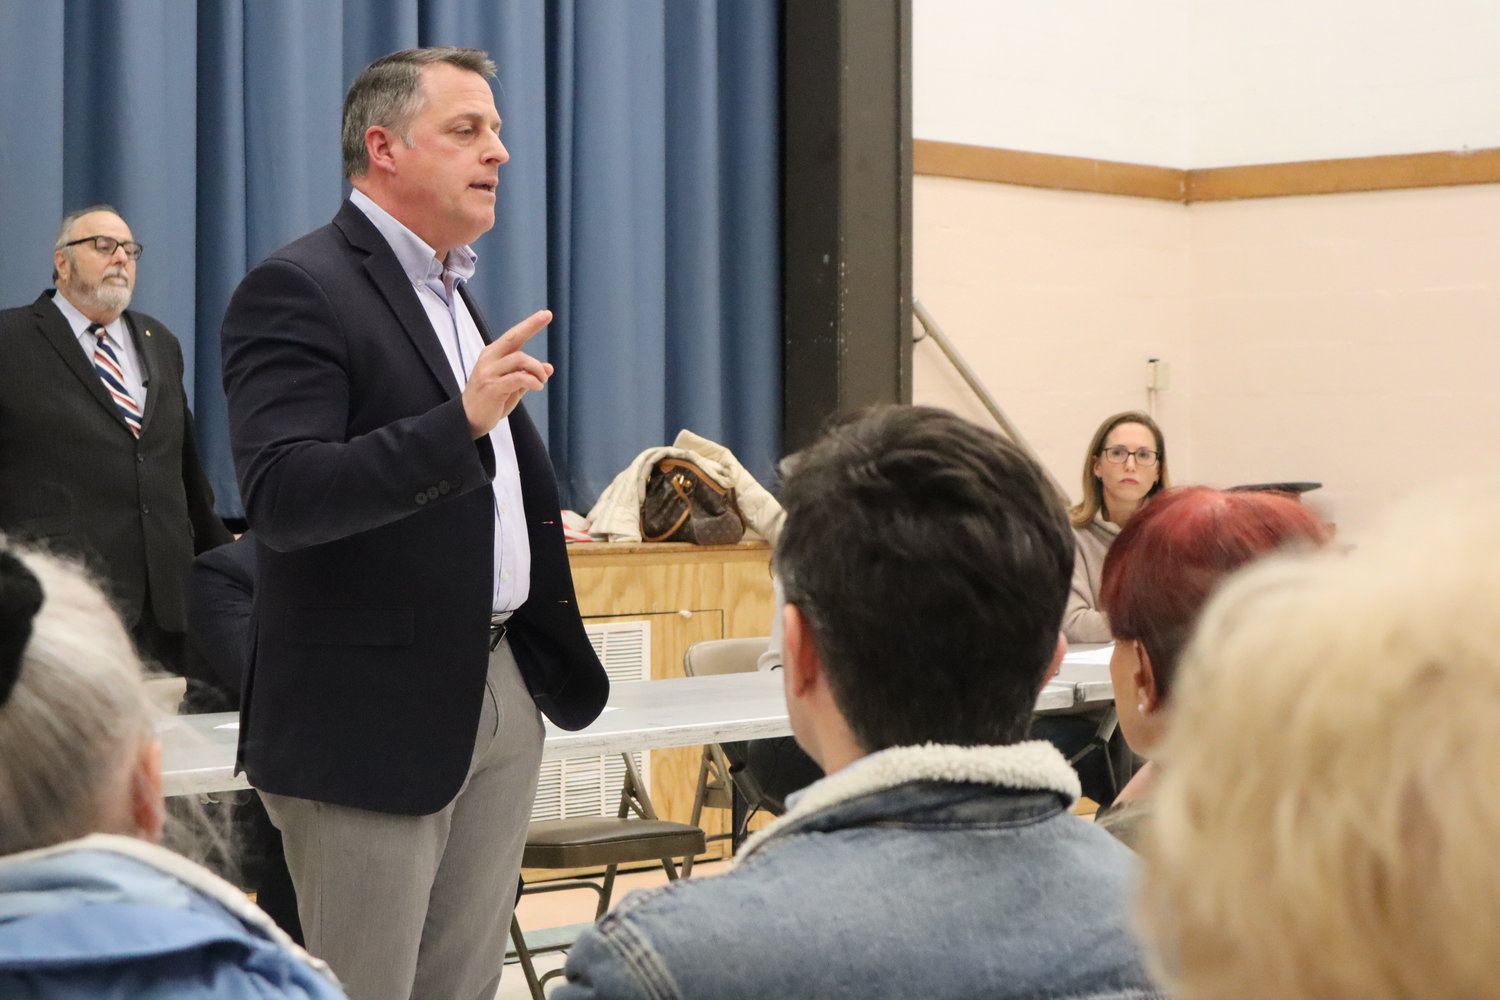 Over a hundred Rockville Centre residents attend a special meeting at the Recreation Center on March 7 to discuss Gov. Hochul’s proposed Housing Compact.